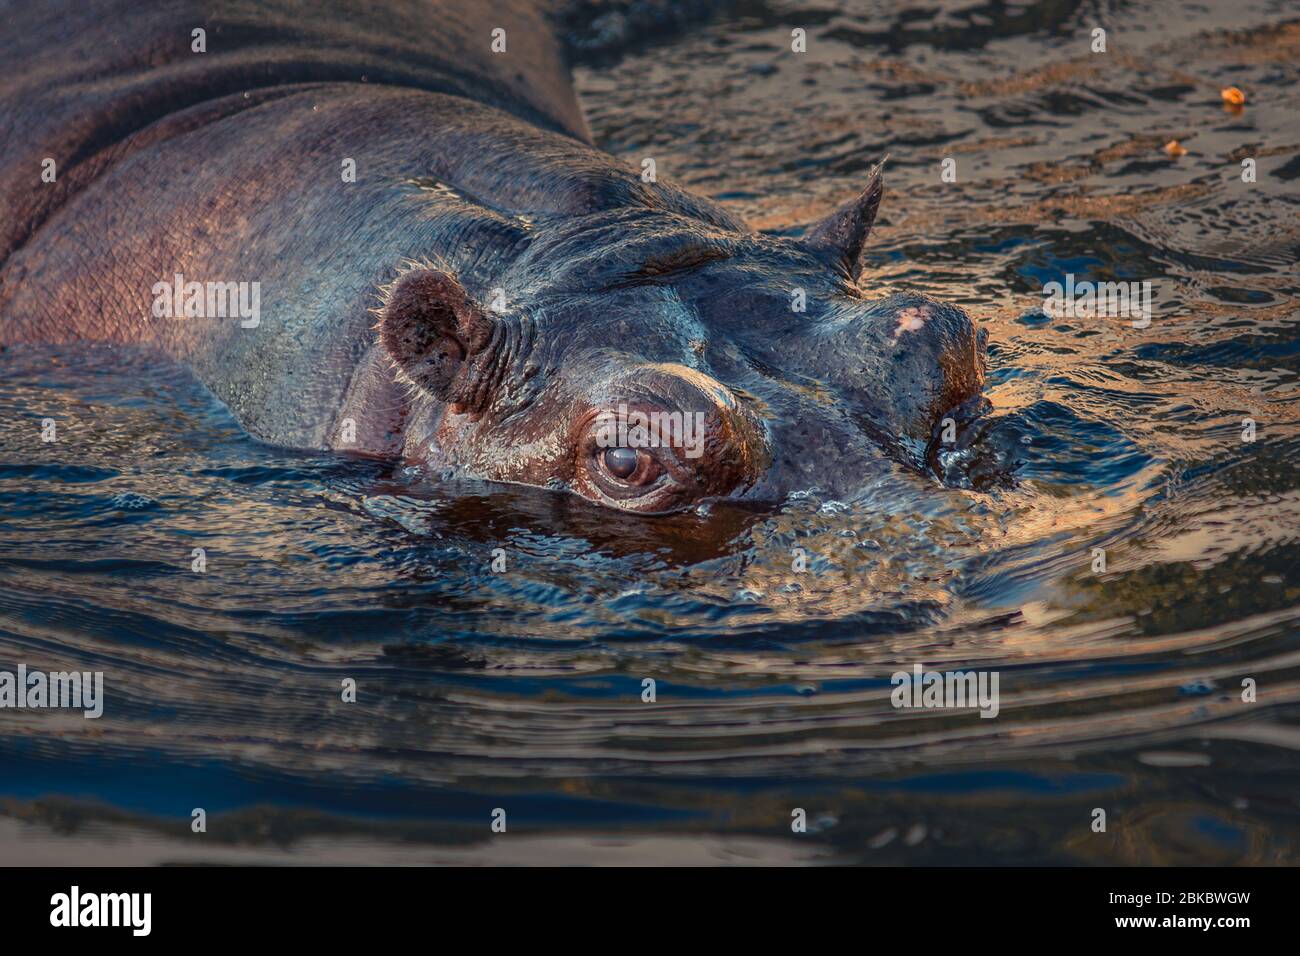 Portrait of the hippopotamus animal submerged in the water. Stock Photo